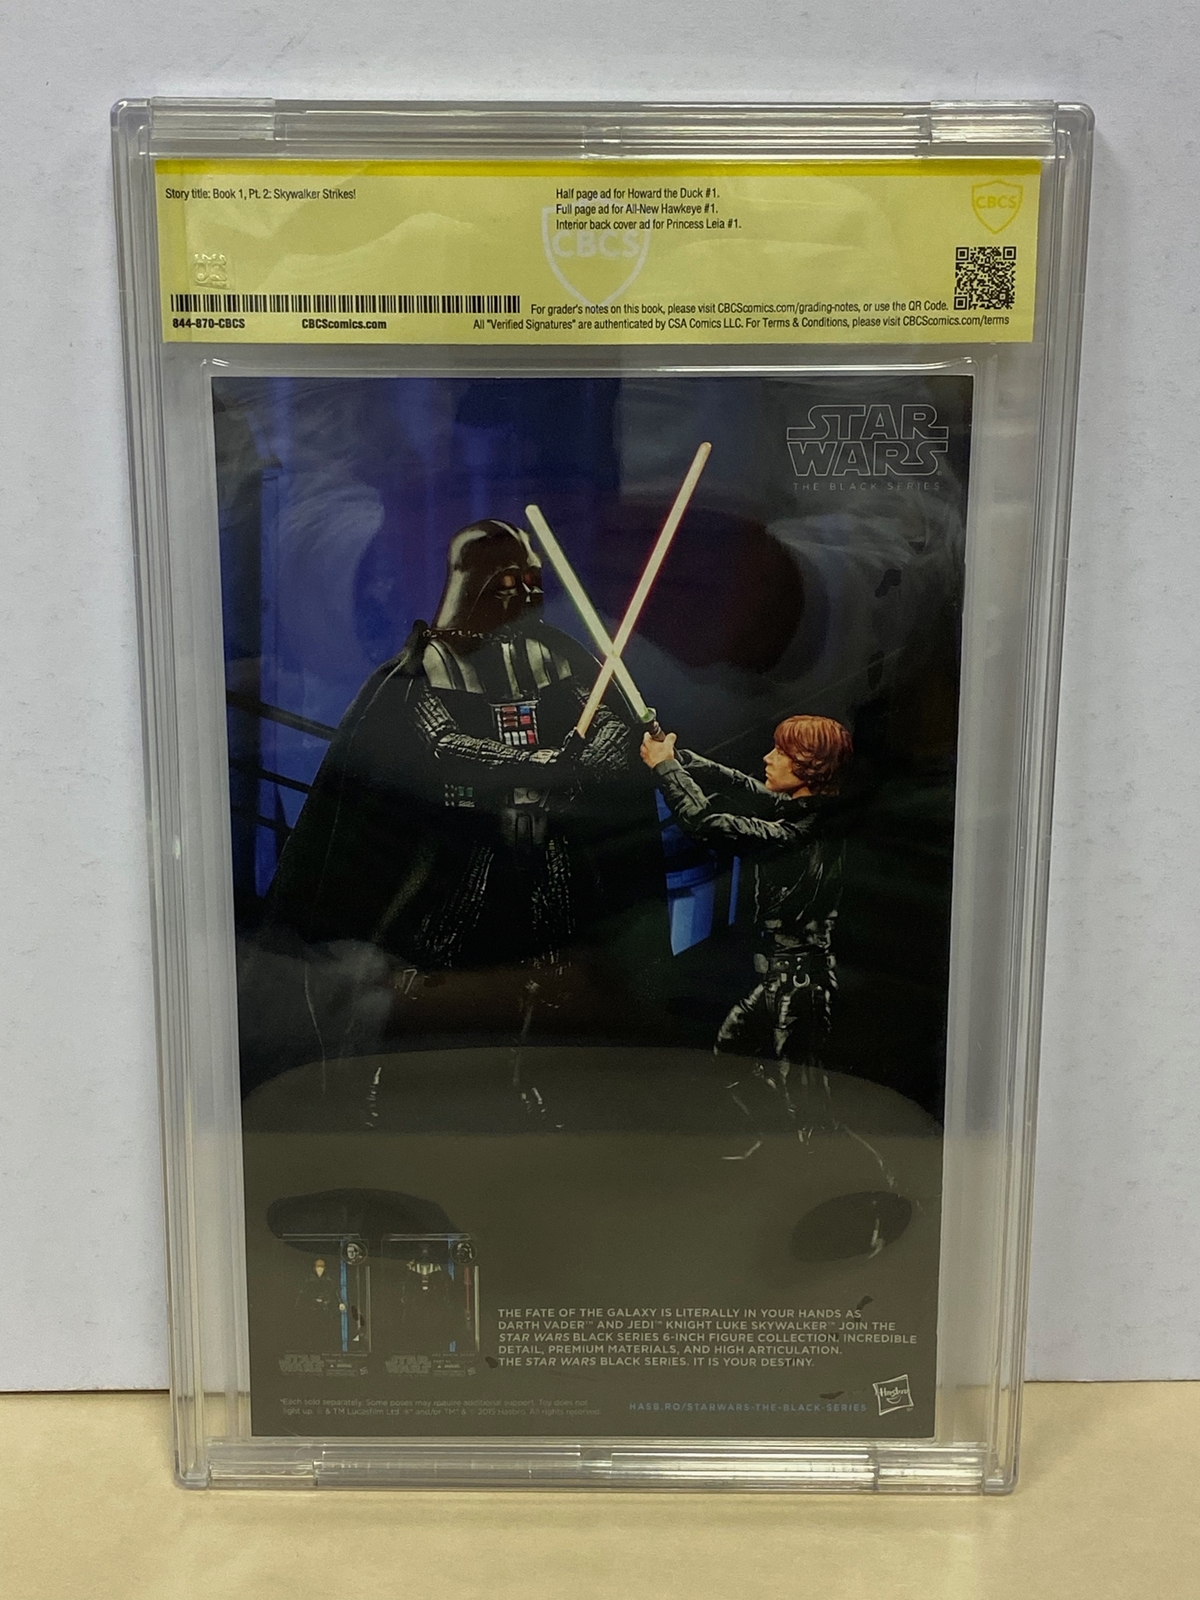 STAR WARS #2 (2015 - MARVEL) Graded CBCS 9.4 (Cents Copy) SIGNED BY JOHN CASSADAY - Retailer - Image 4 of 4